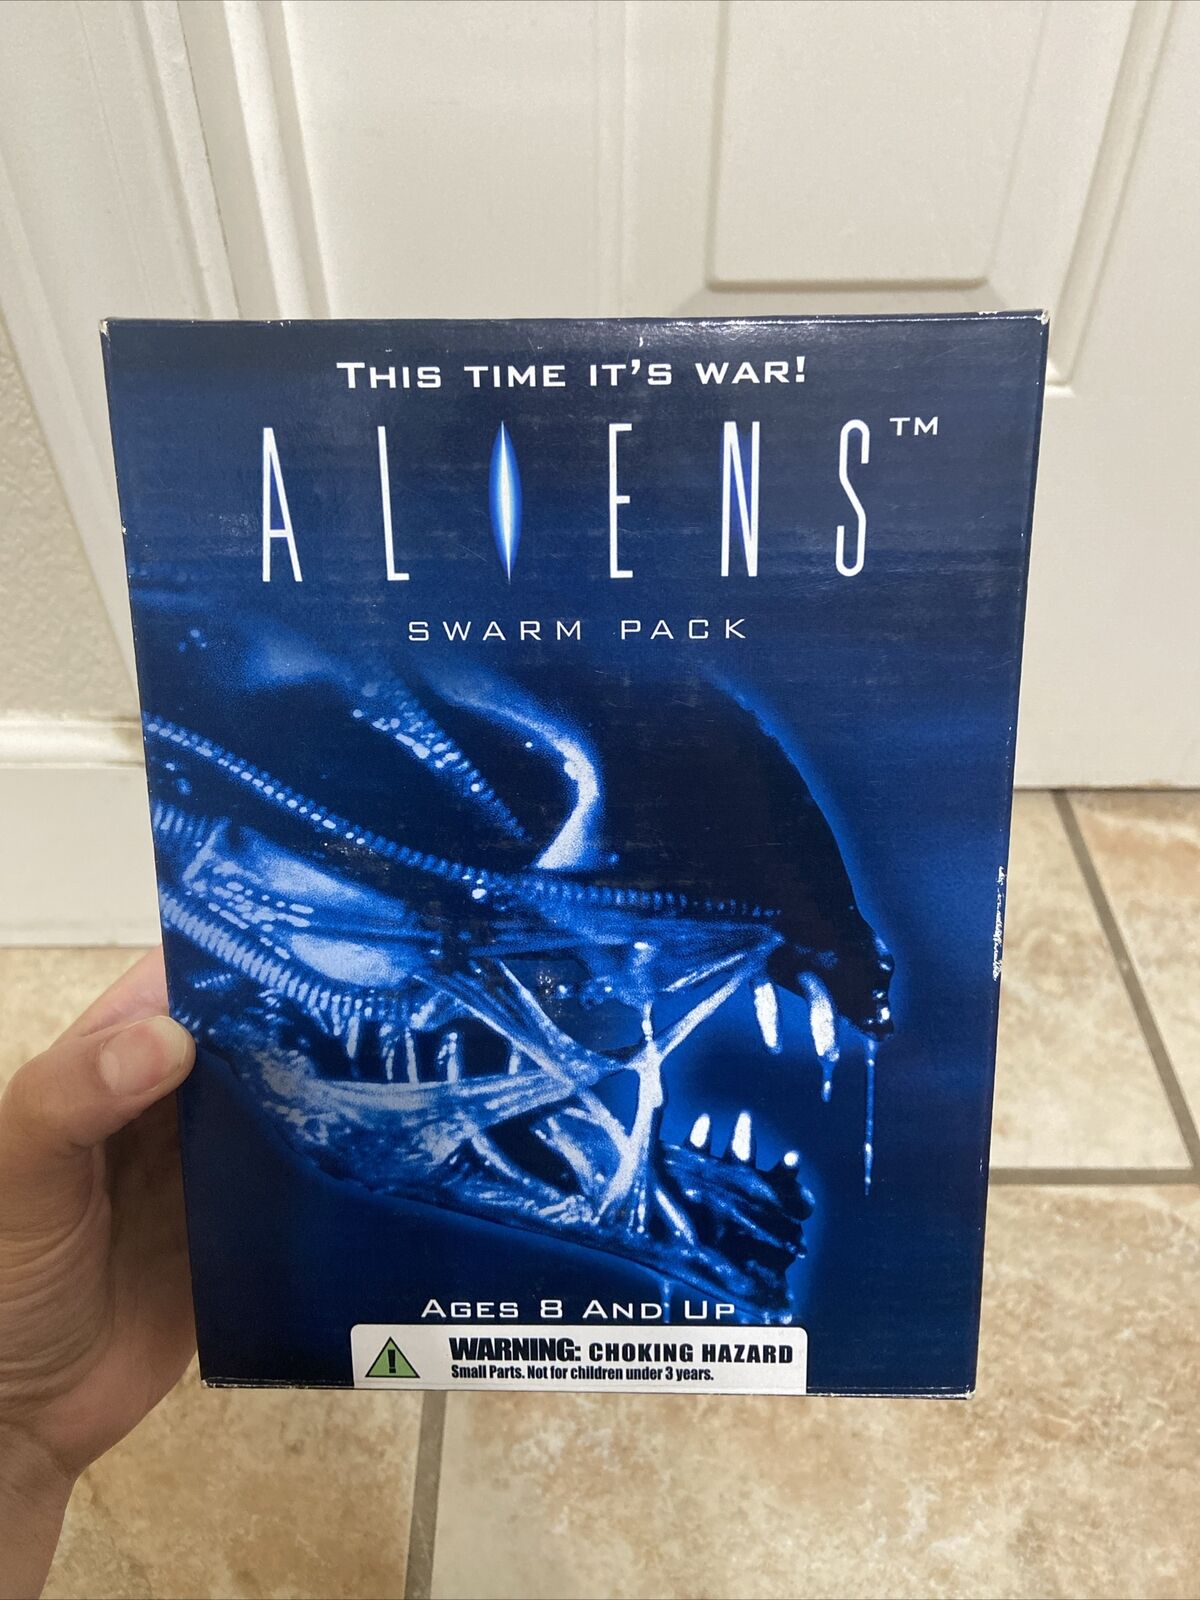 Aliens 2004 This Time It’s War Aliens Swarm Pack